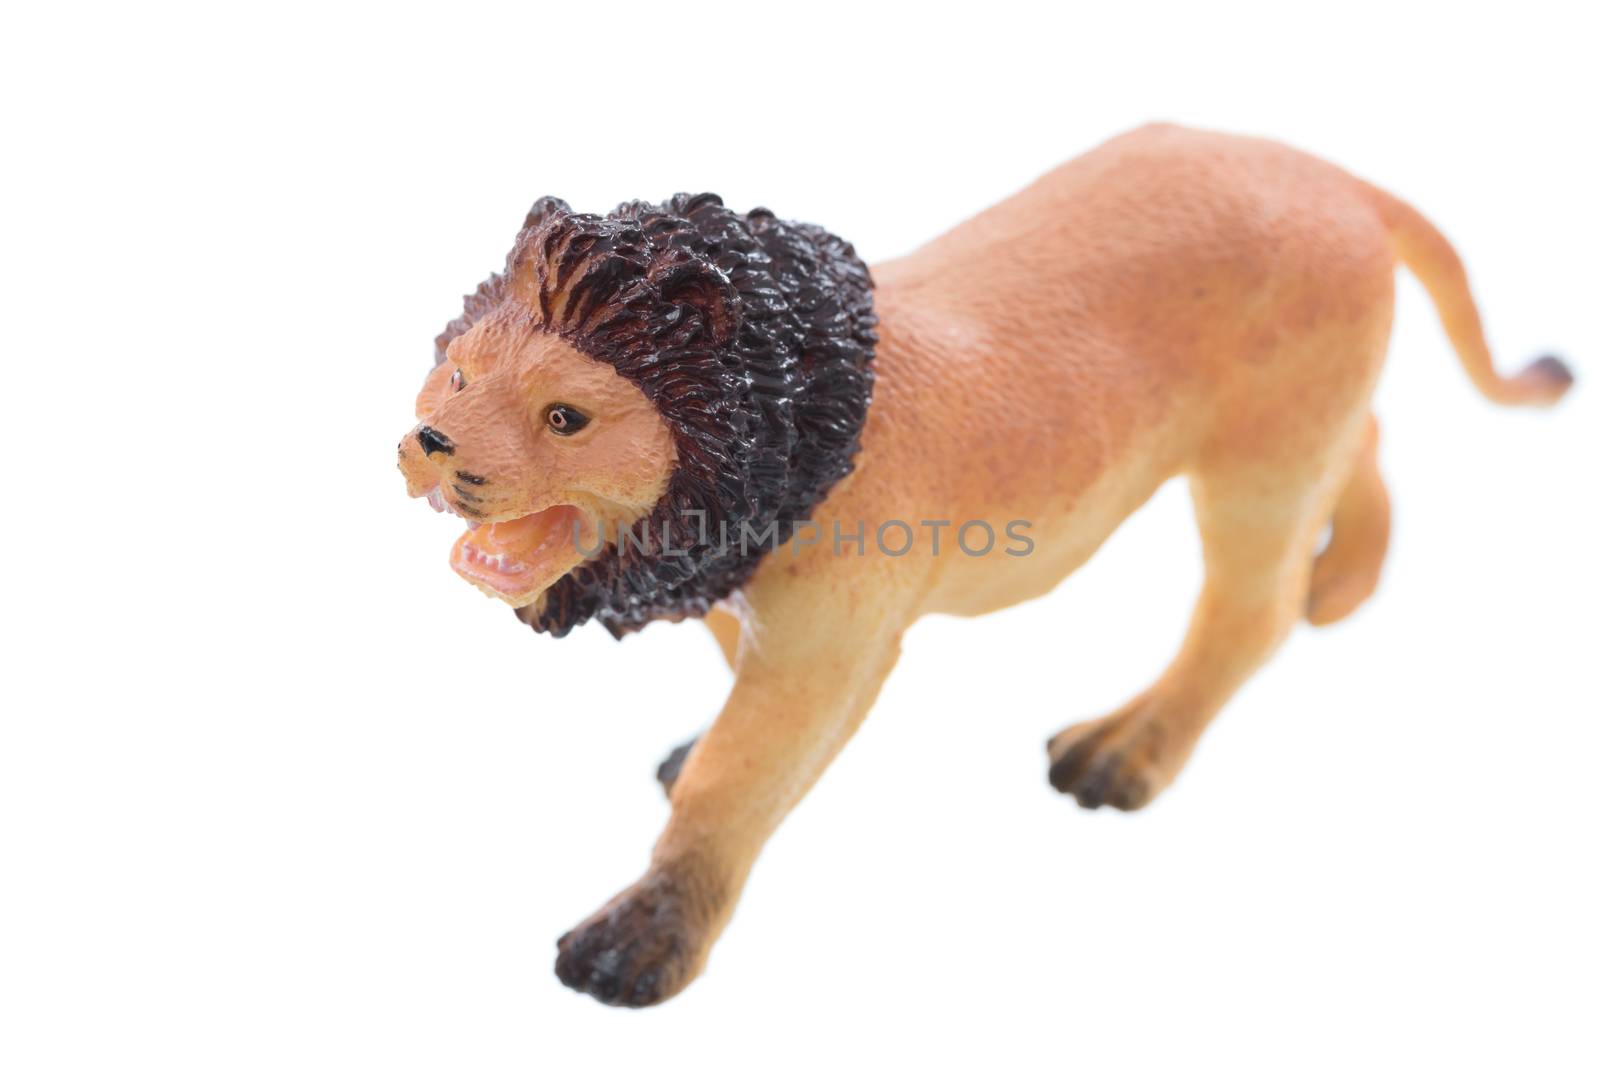 A small toy lion ioslated on a white background.